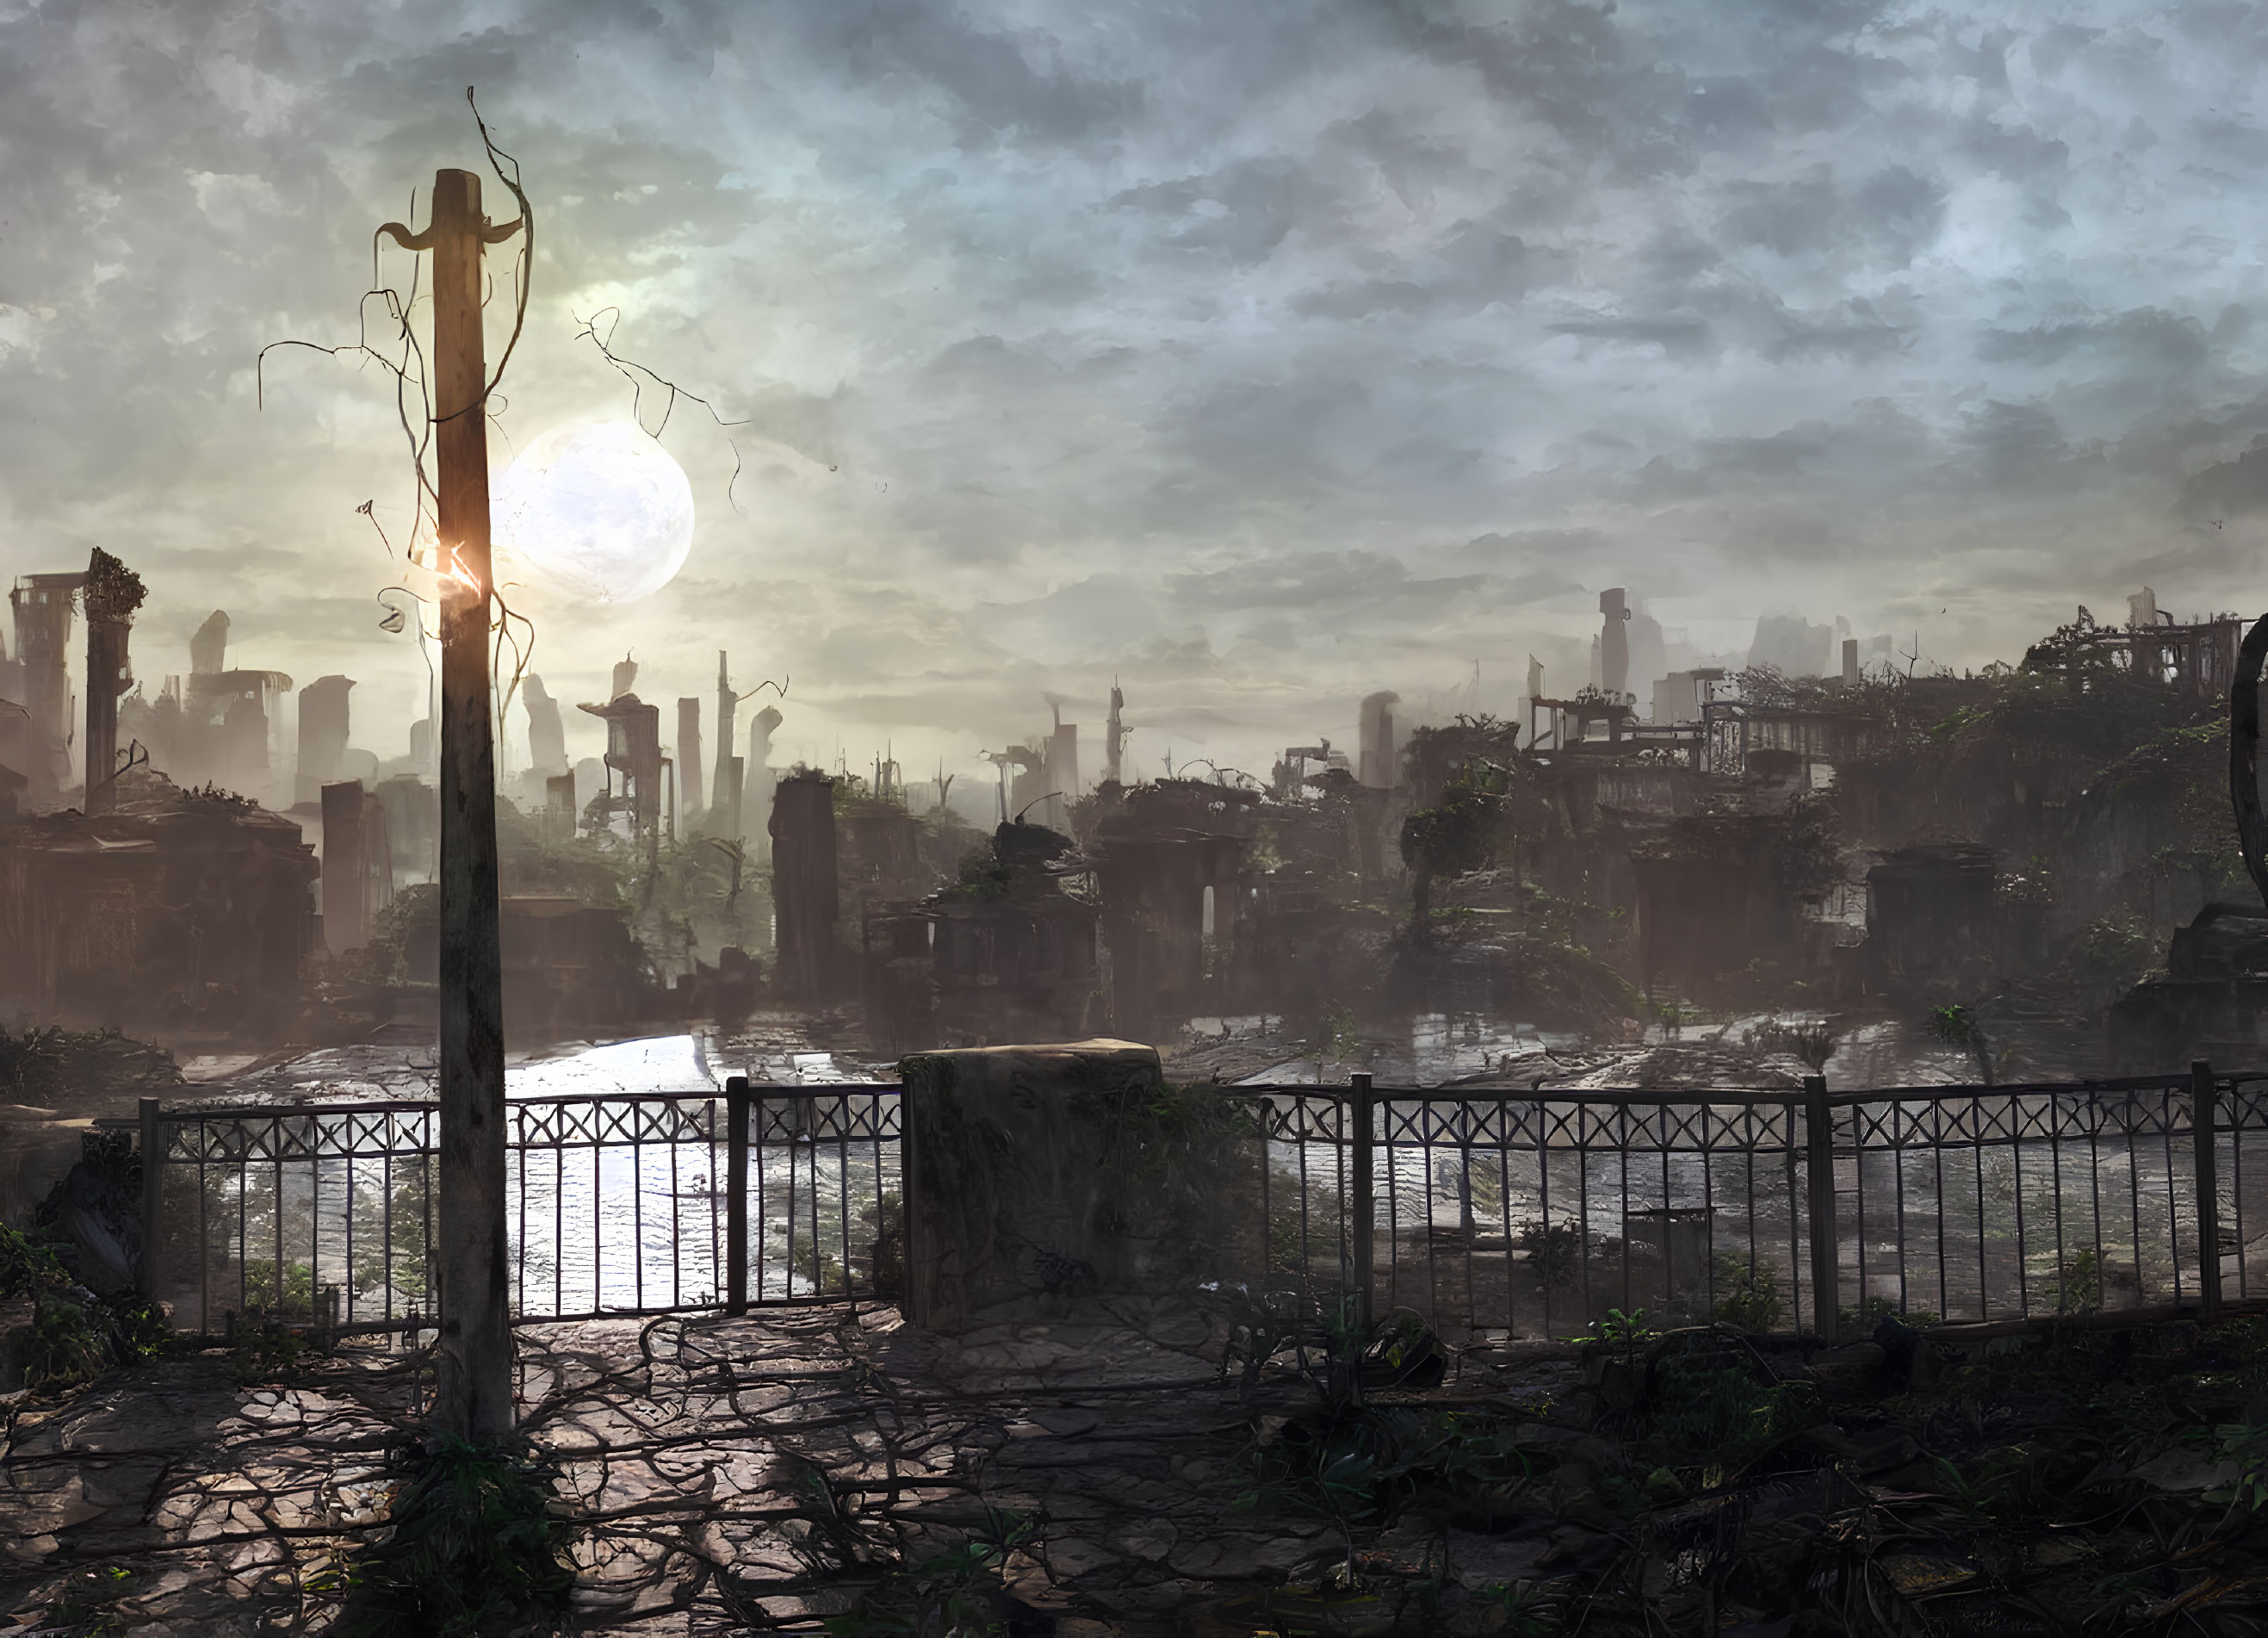 Dystopian cityscape at dusk with overgrown ruins and glowing lamppost